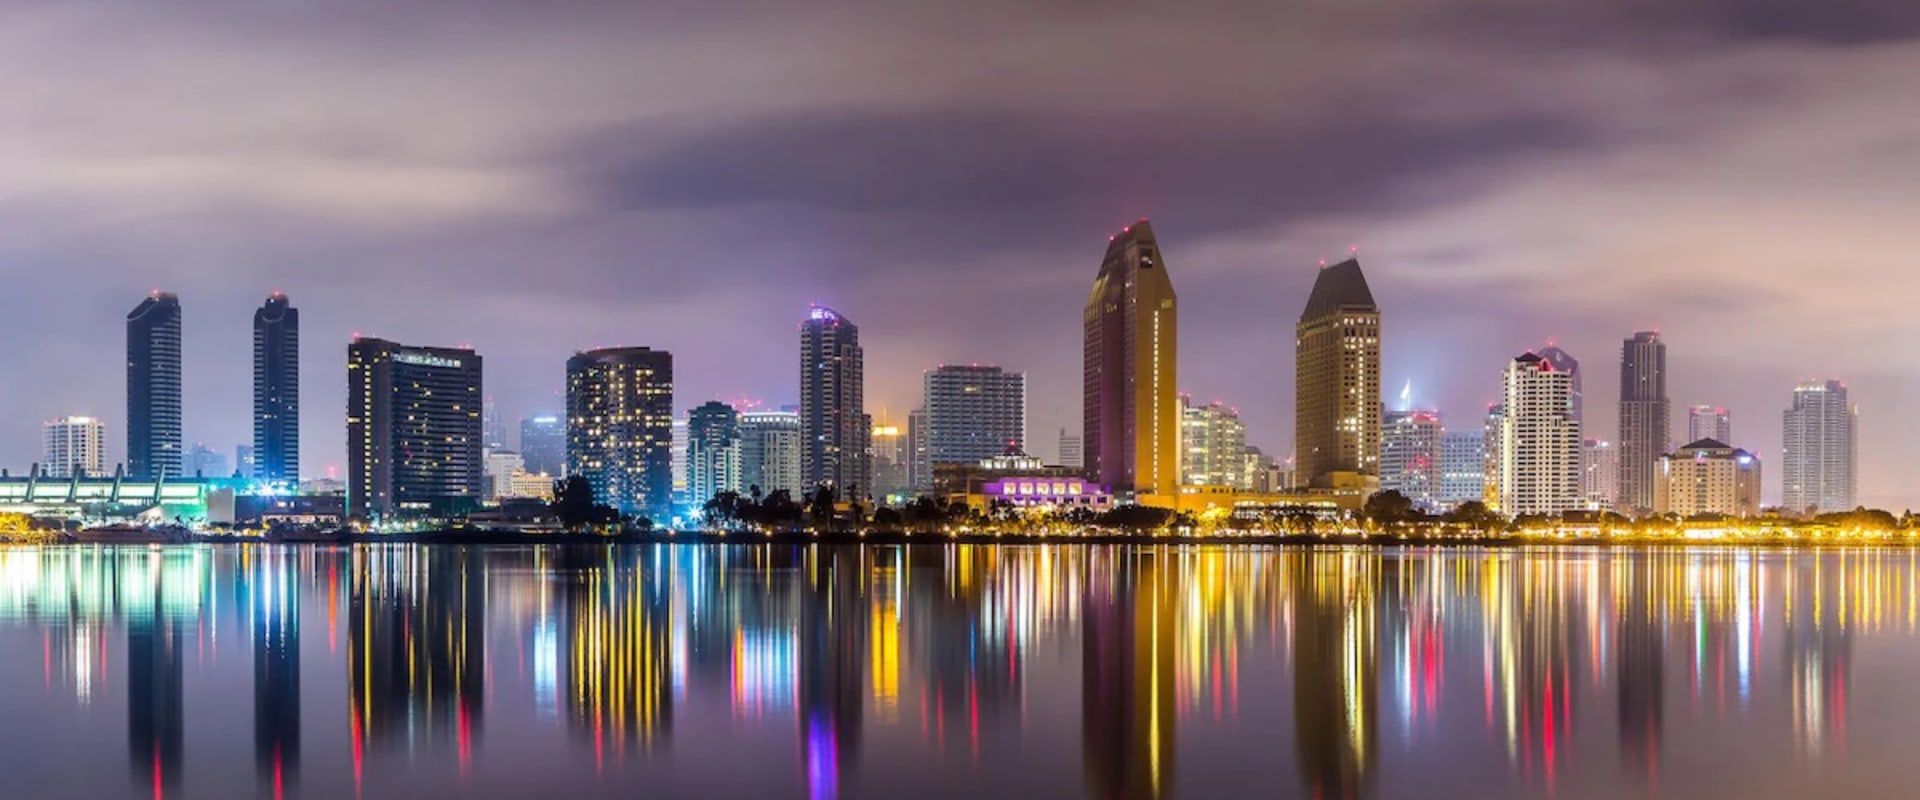 Why san diego is the best city?